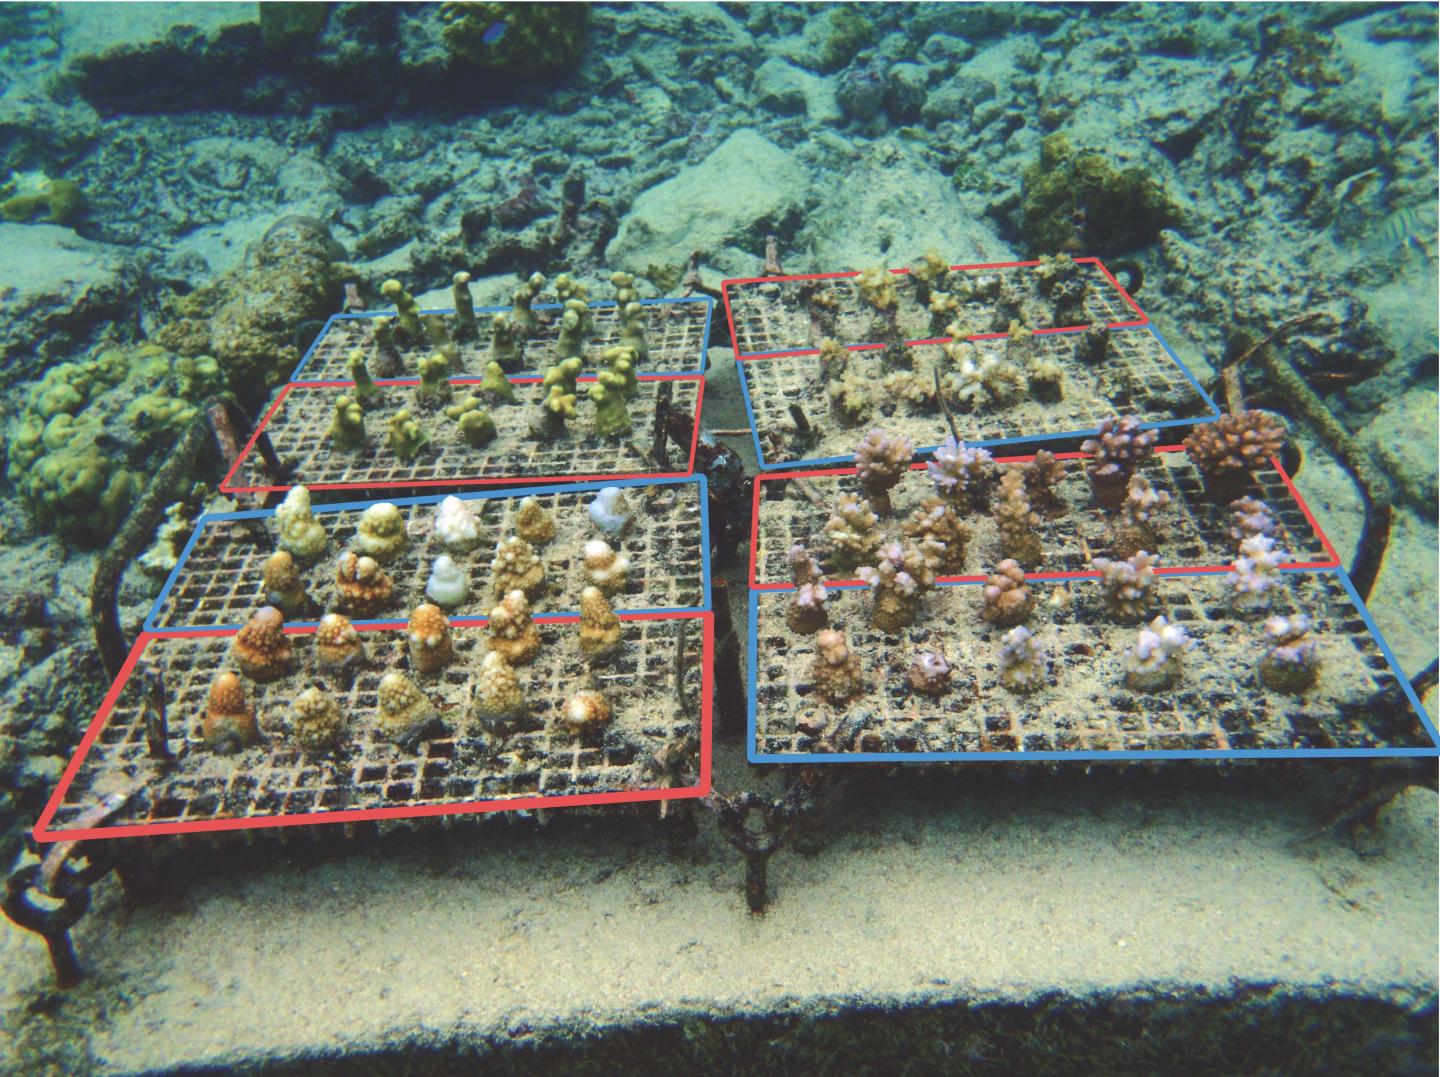 A Coral Nursery Panel after the 2015 Bleaching Event